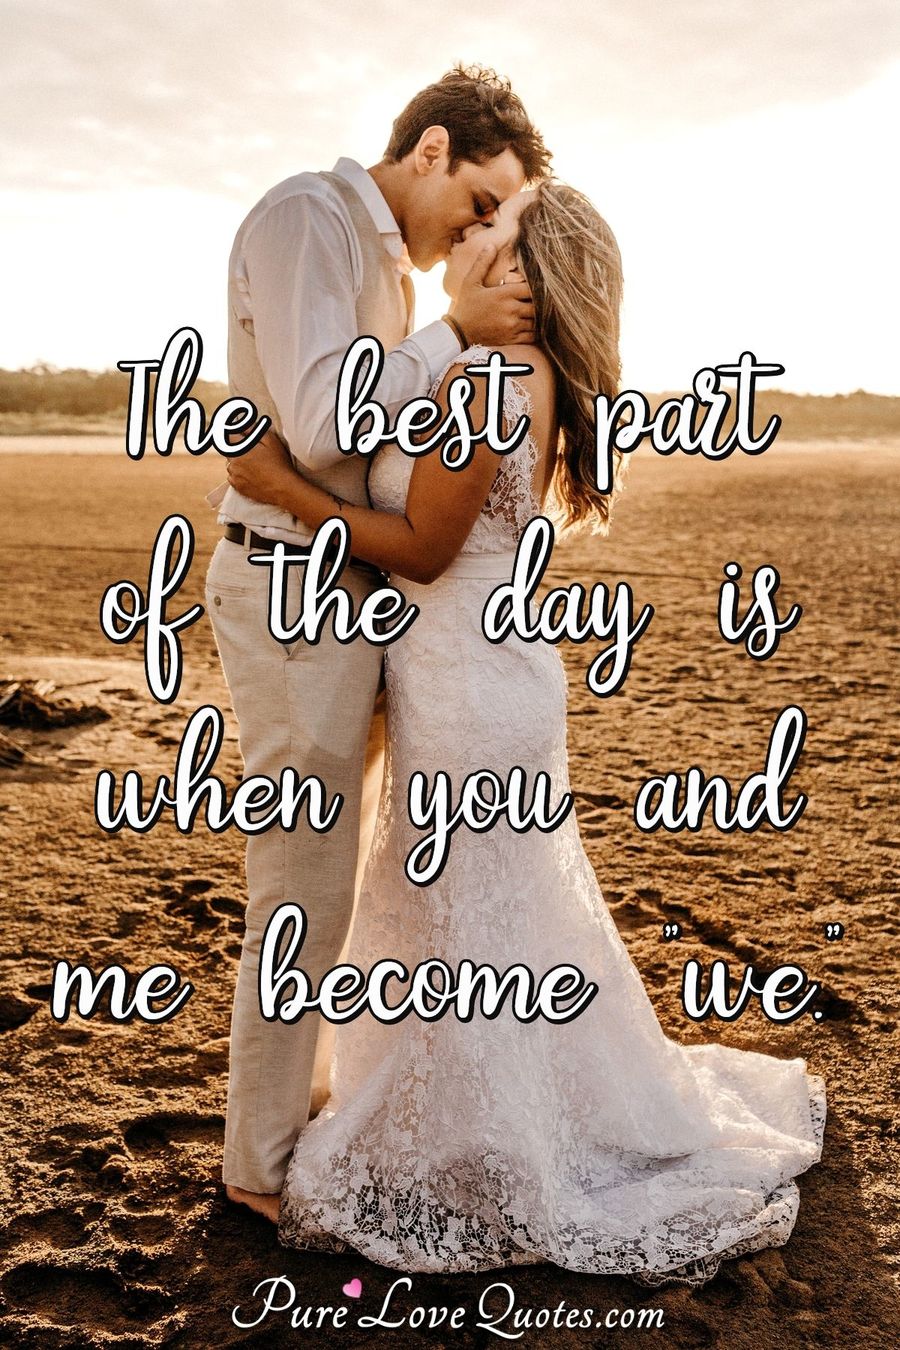 The best part of the day is when you and me become 